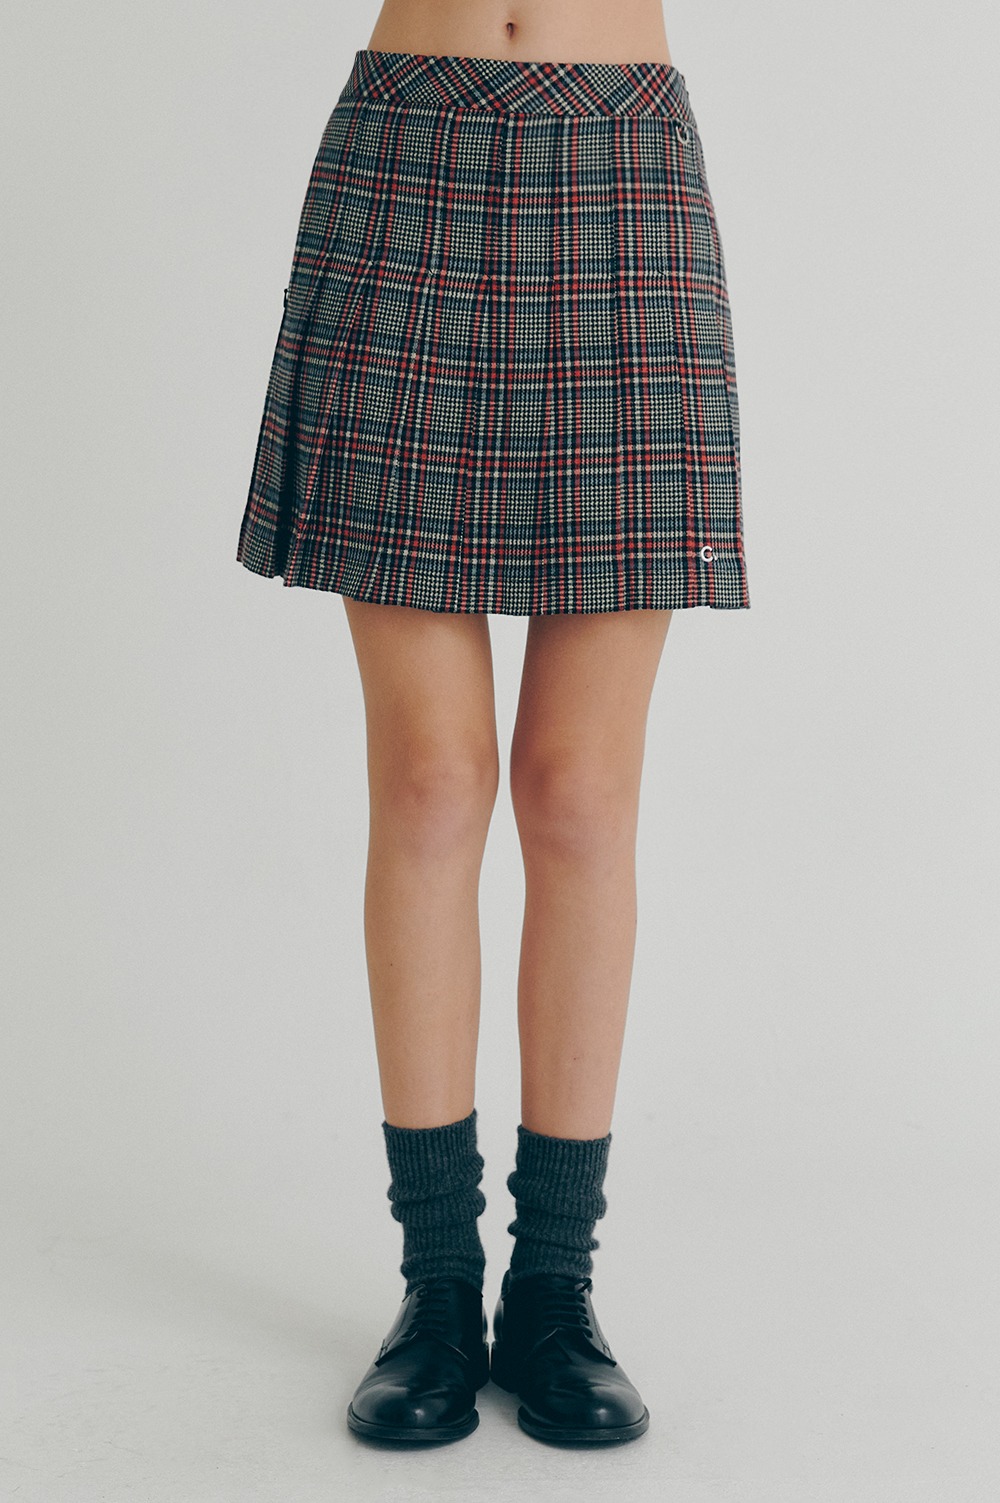 clove - [22FW clove] Check Pleated Skirt (Red)